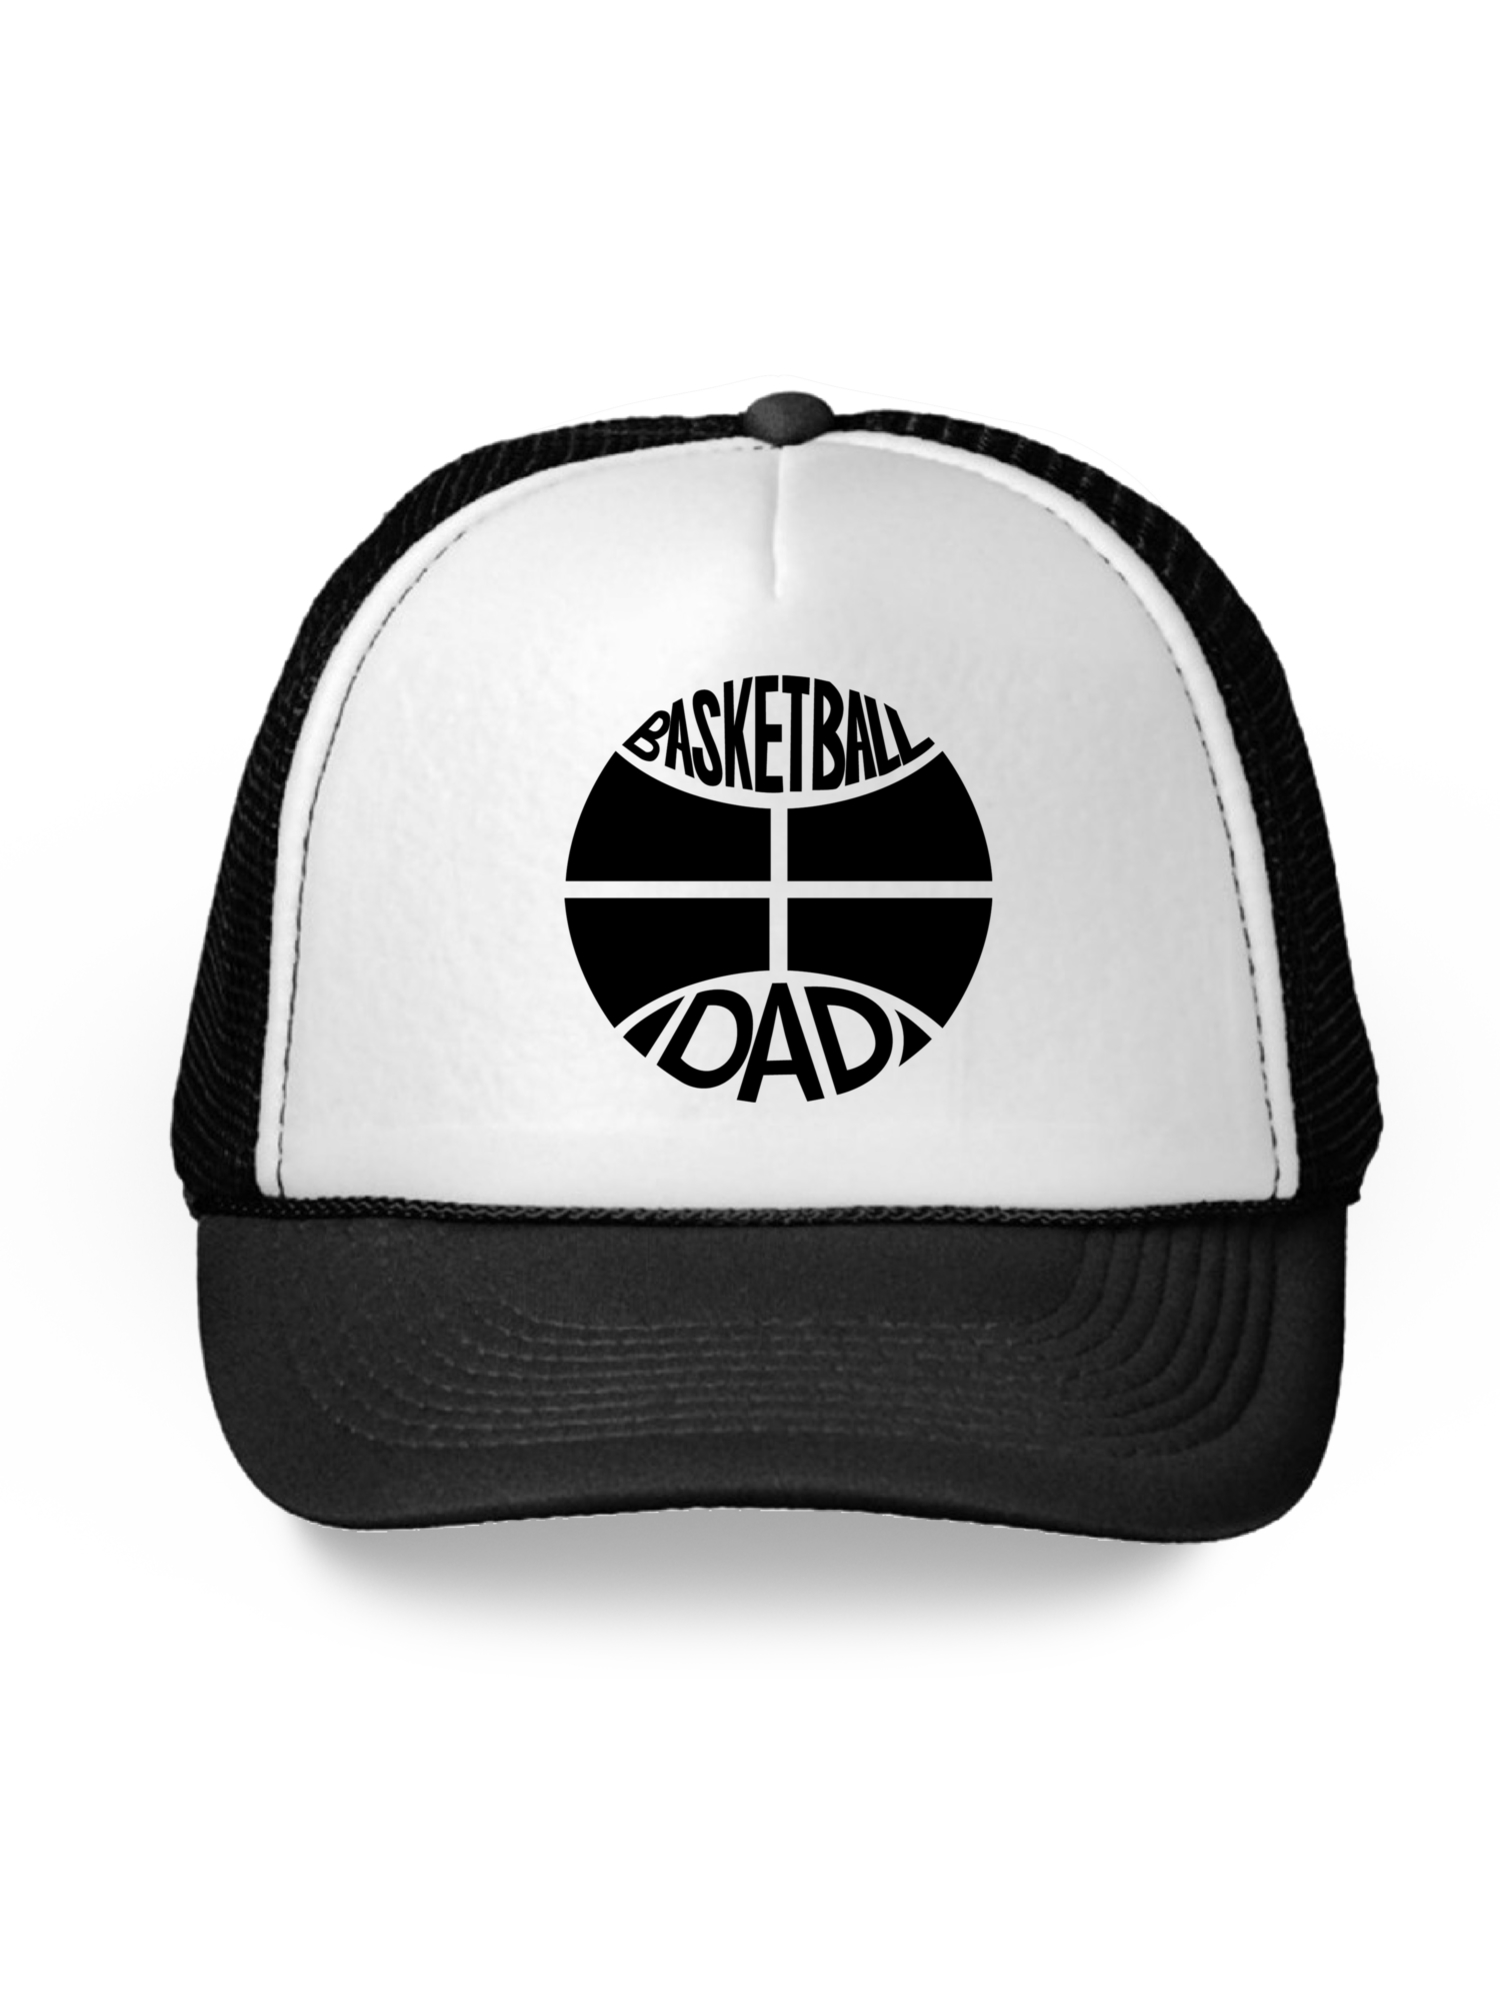 Awkward Styles Volleyball Dad Trucker Hat Volleyball Hat for Dad Volleyball Gifts Father's Day Trucker Hats Sports Dad Snapback Hat Volleyball Fans Cheer Dad Trucker Hat Cool Sports Gifts for Dad - image 1 of 6